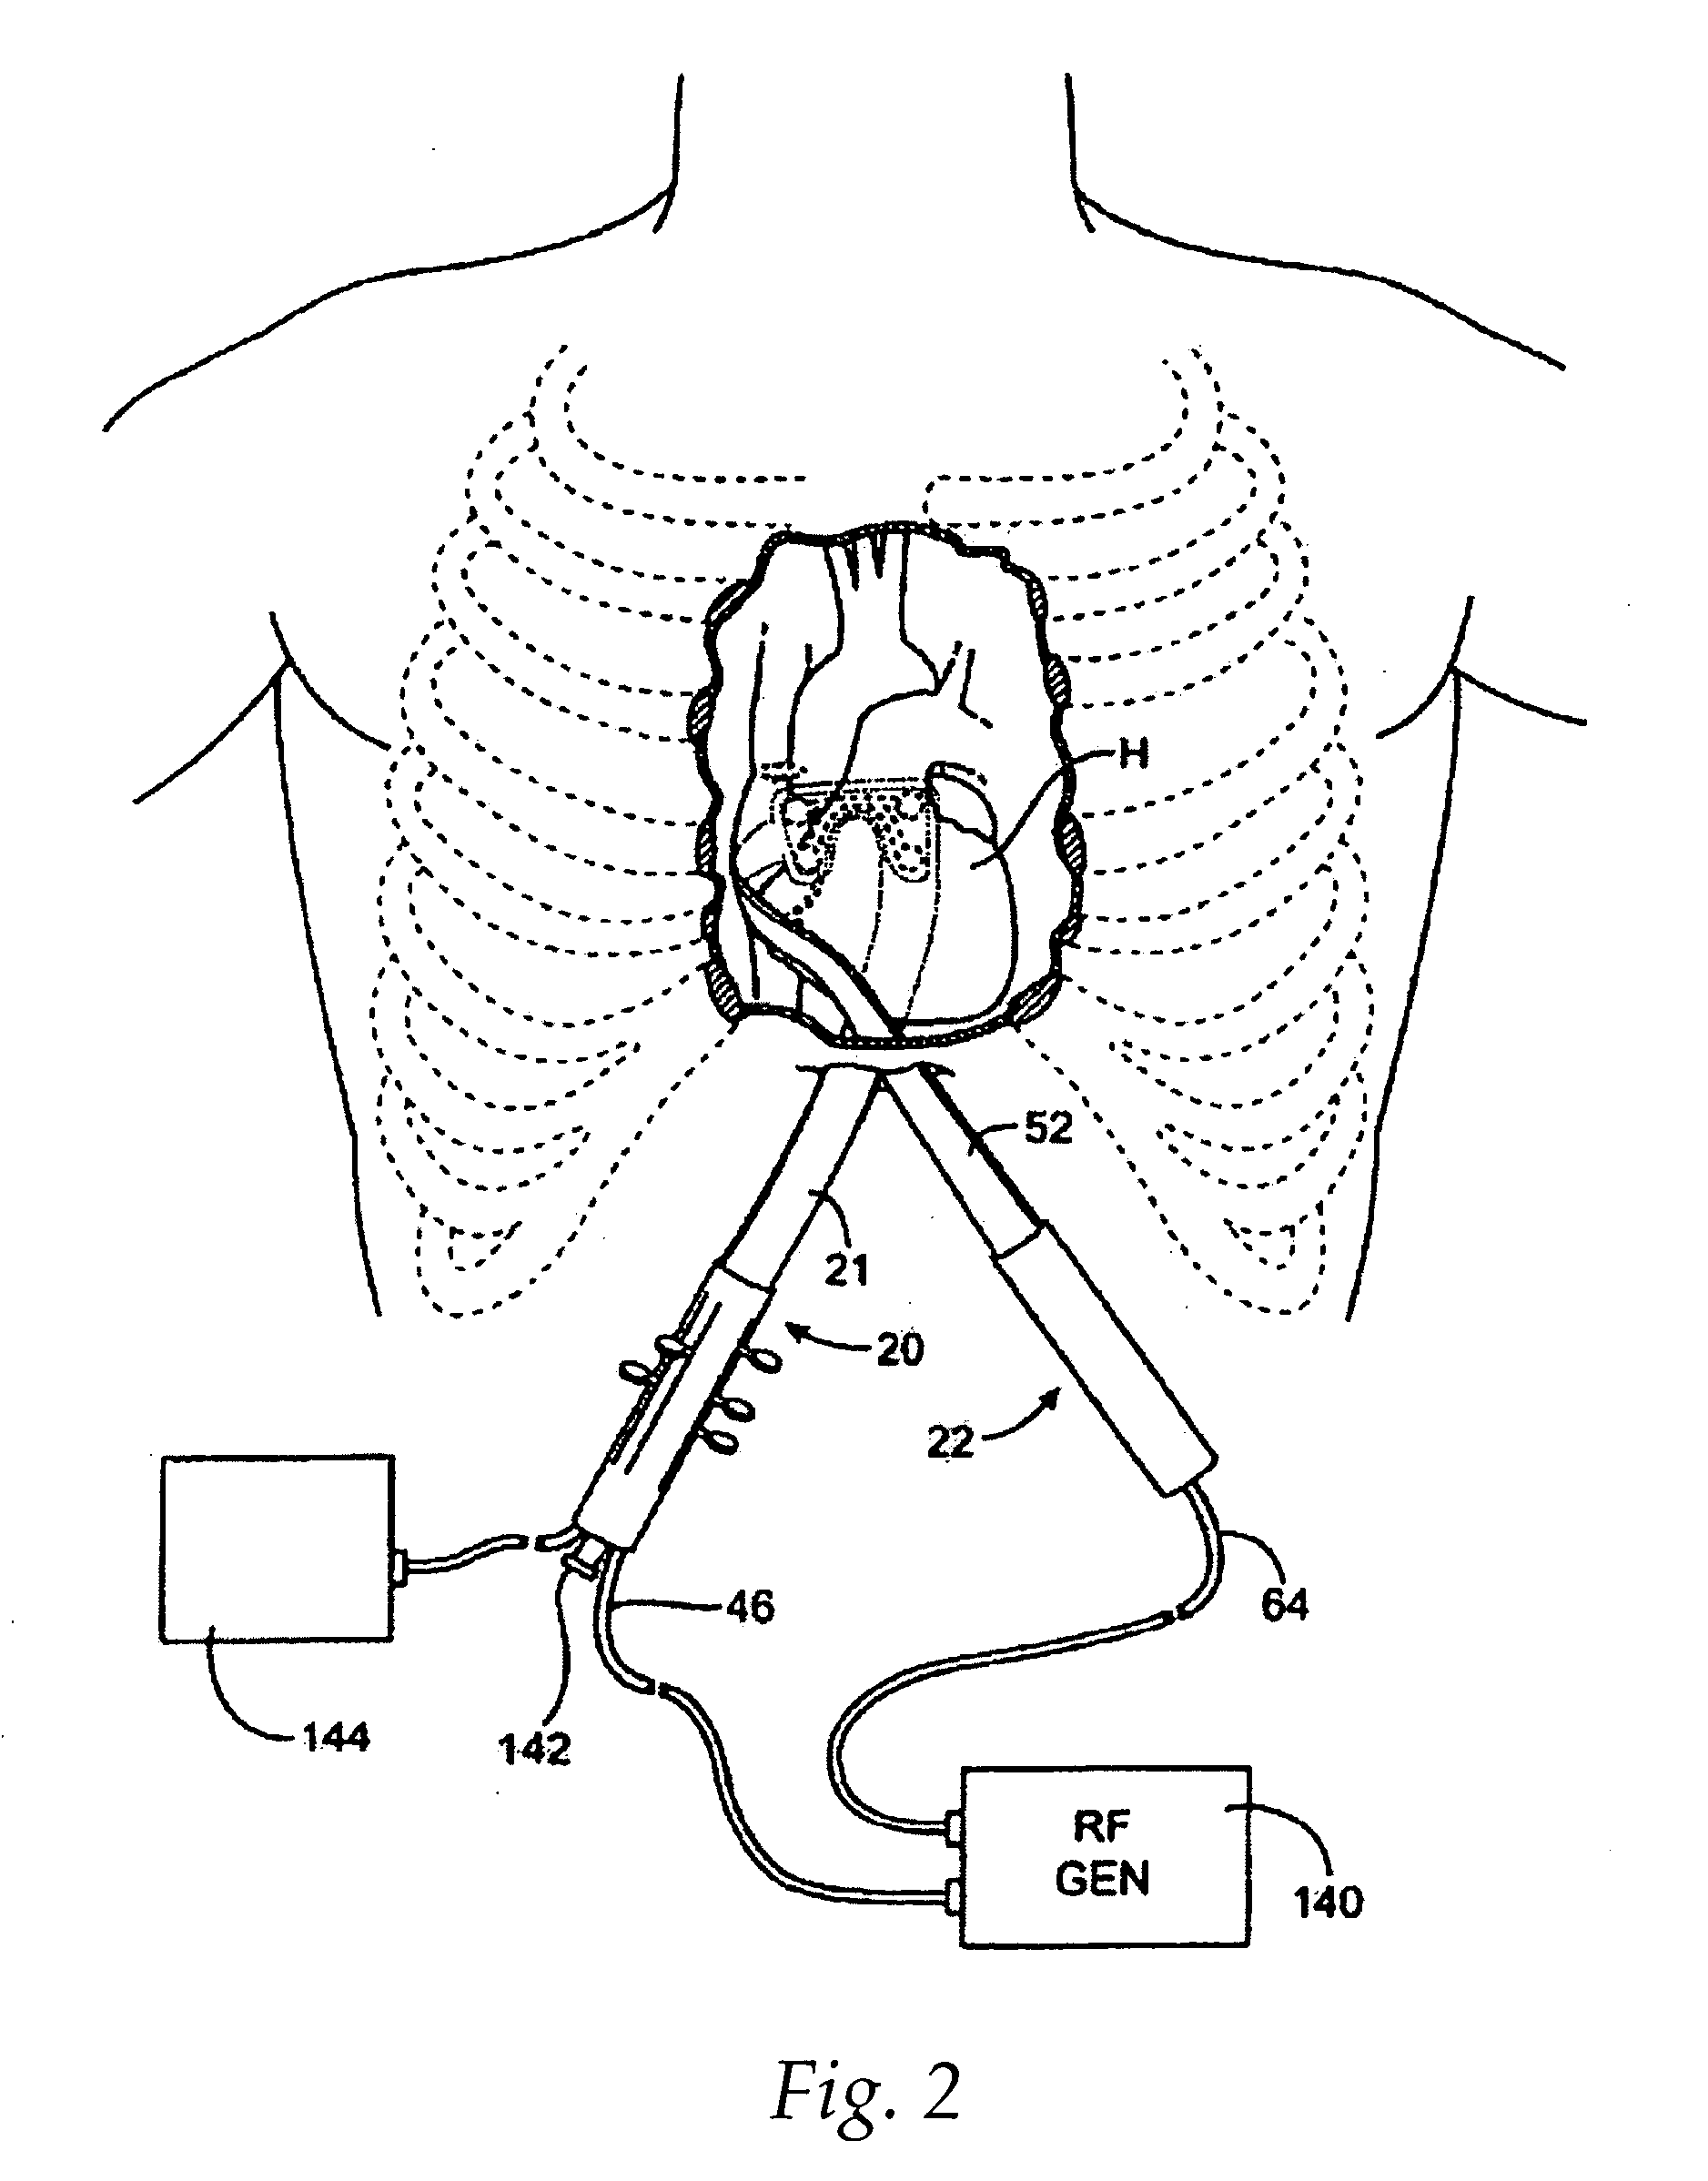 Switching methods and apparatus